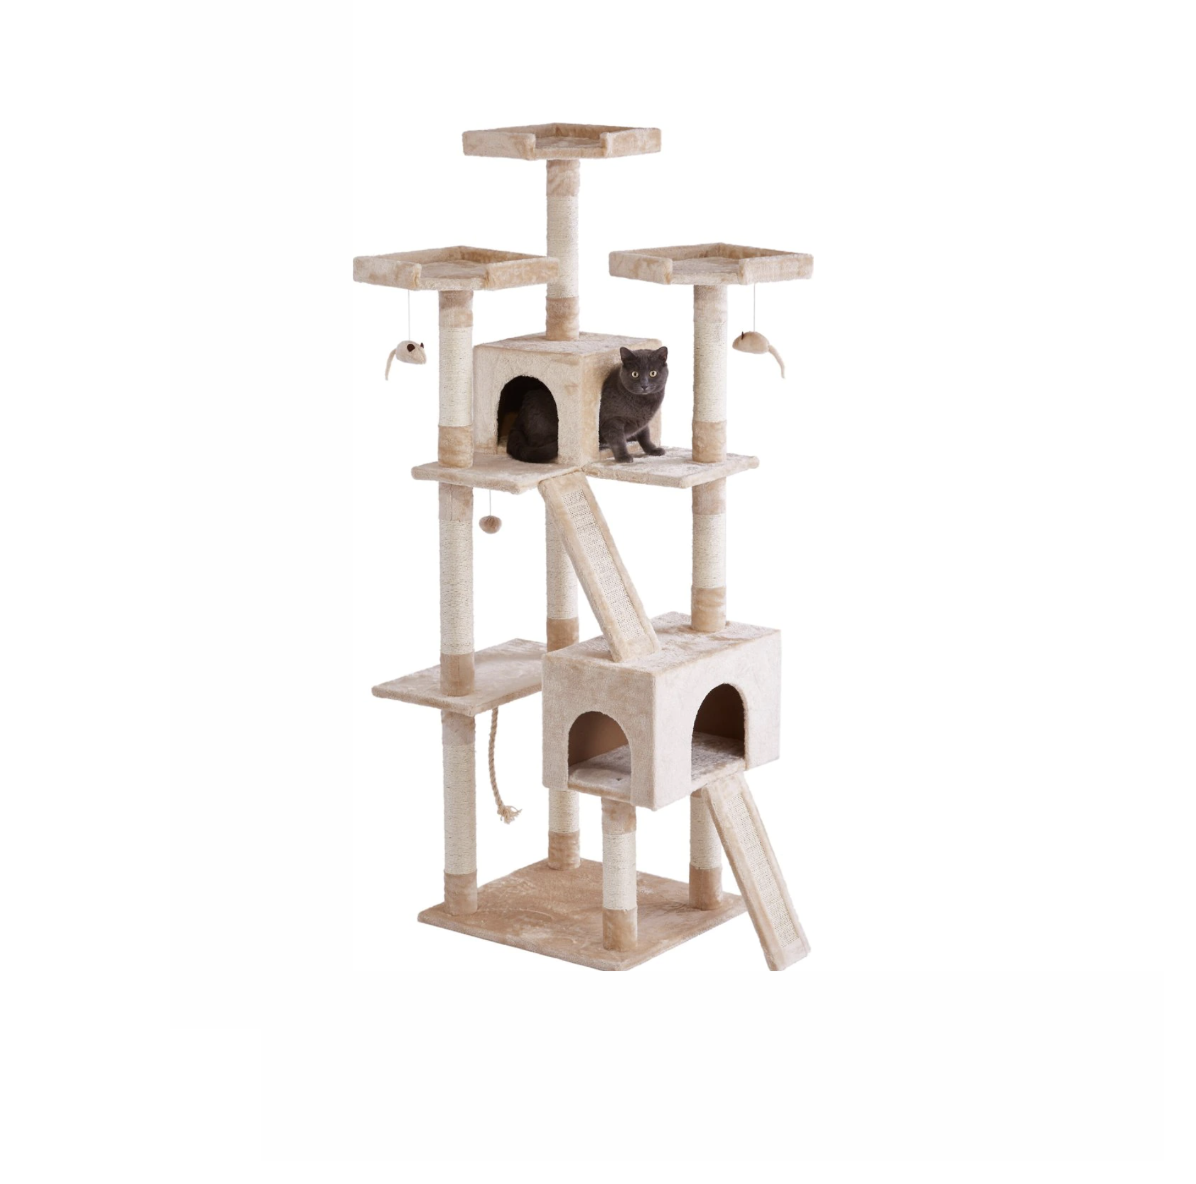 PETEPELA 69 Inches Cat Tree Large Cat Tower with 2 Condos and 2 Perches,2 Ramp Ladder Grey Kitty Climber Tower Furniture 